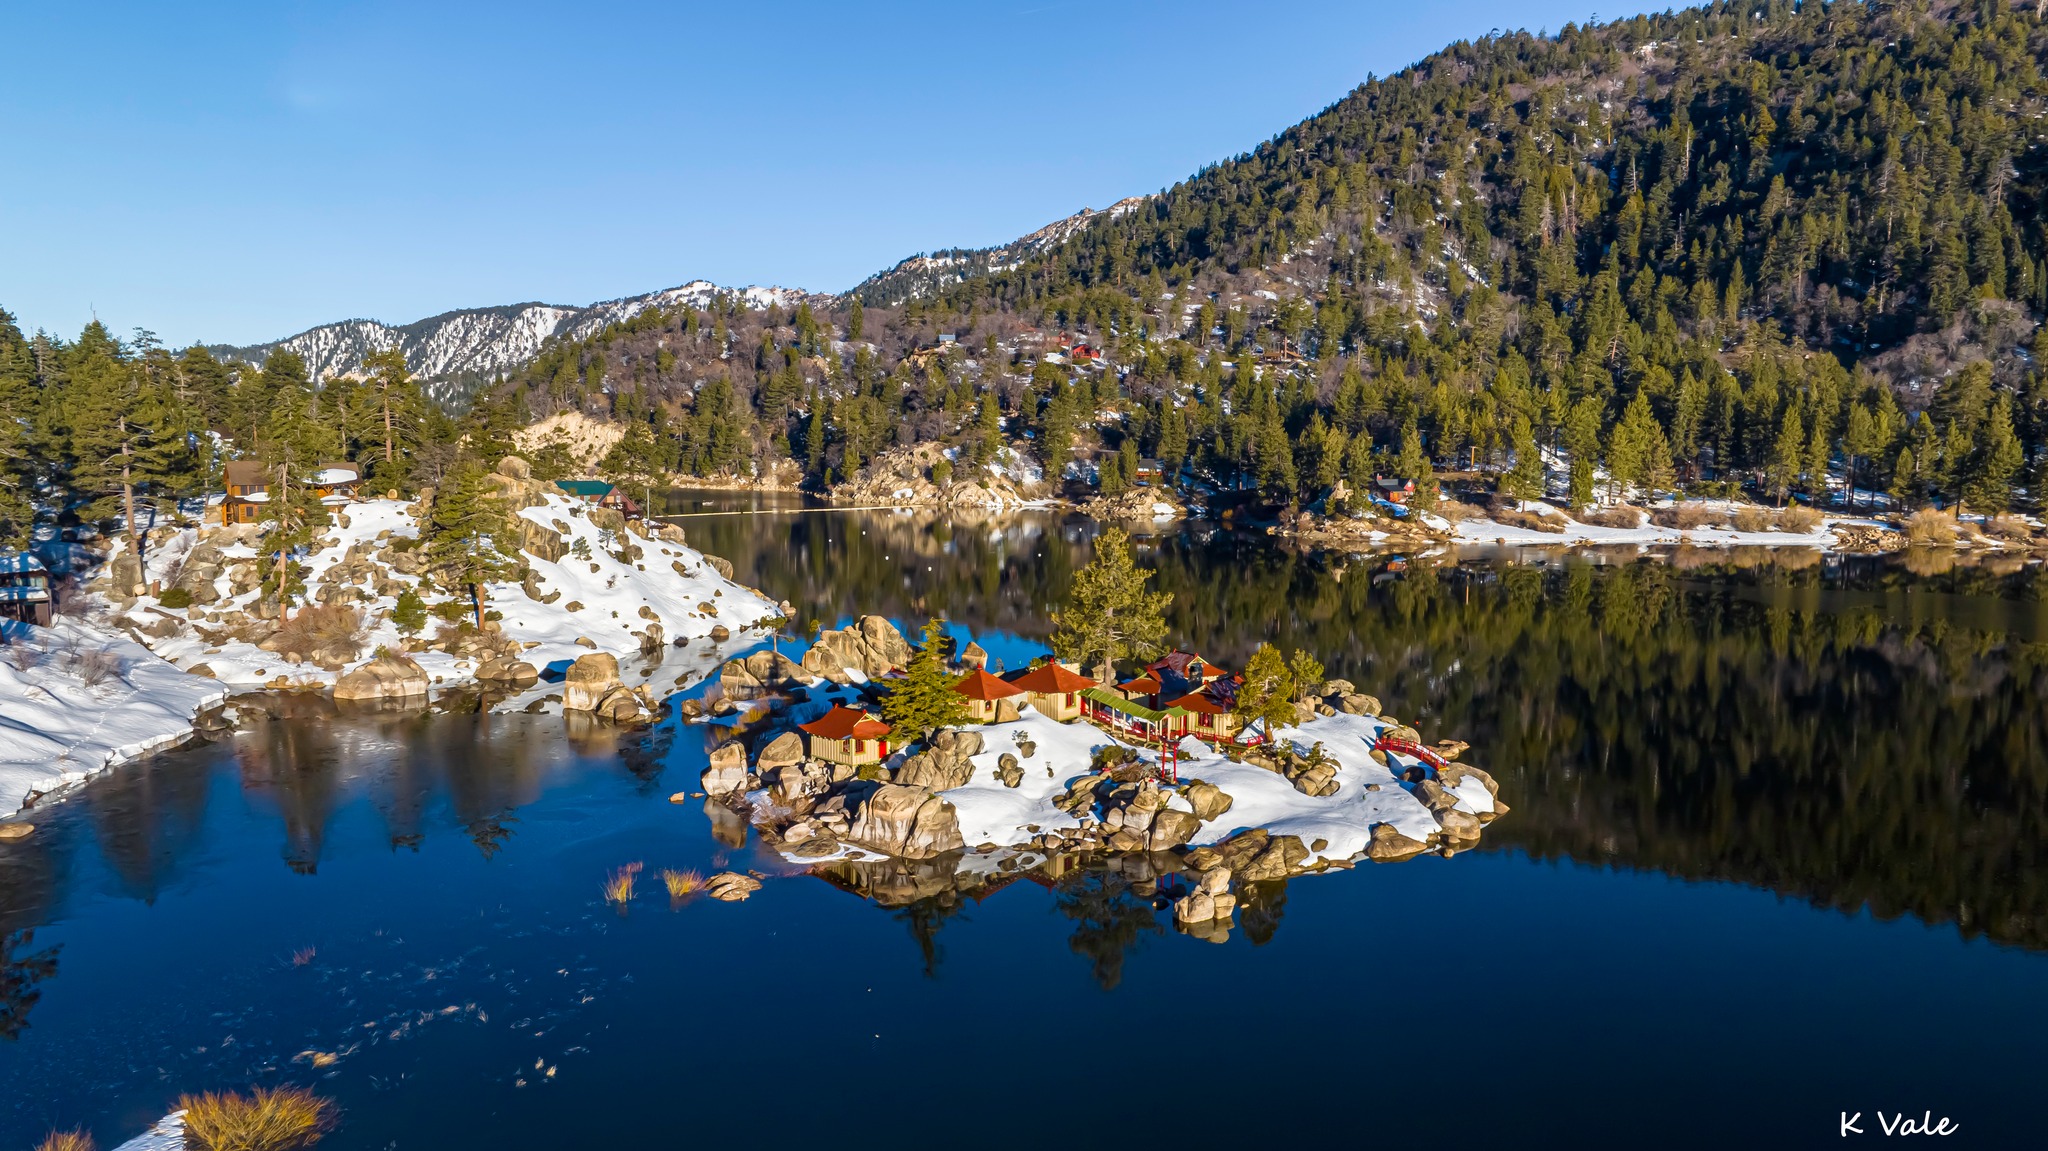 China Island as seen from a low drone angle in Big Bear Lake in Springtime